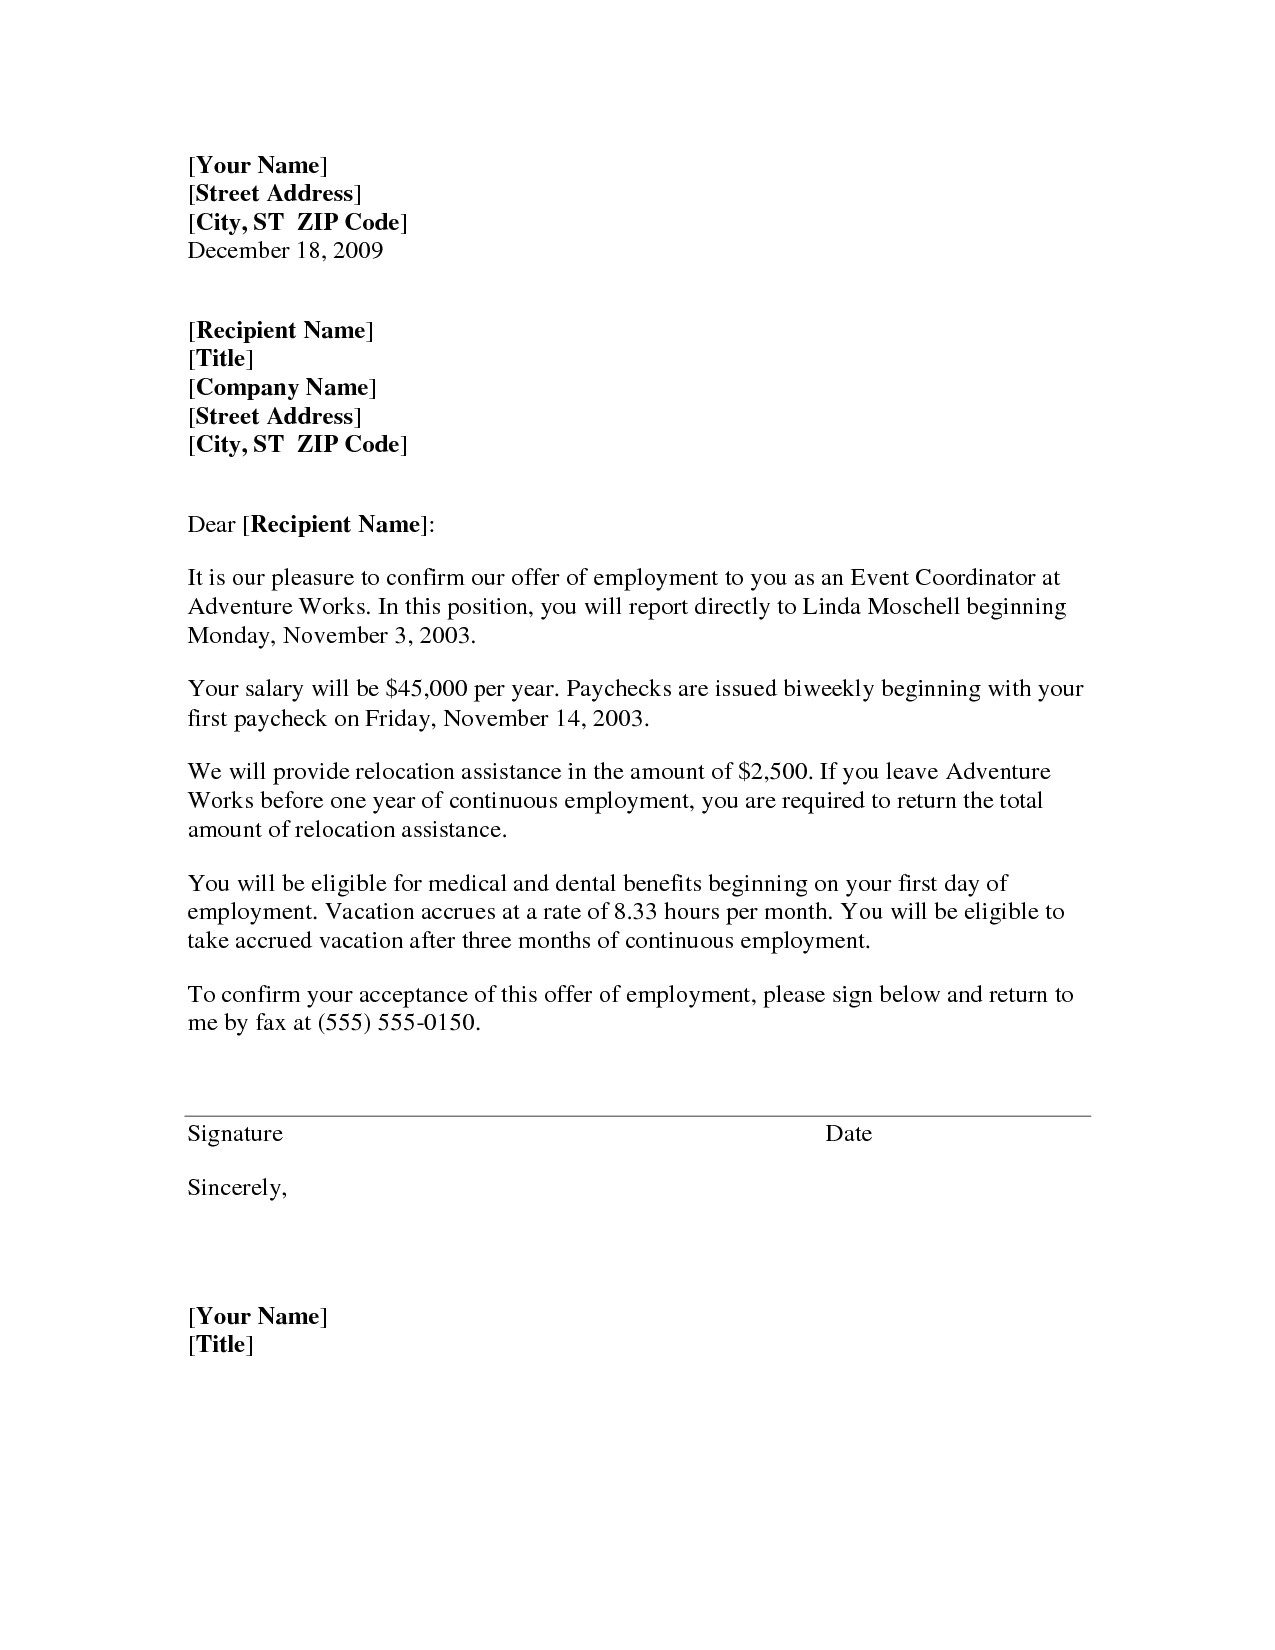 post irs cover letter sample 390479